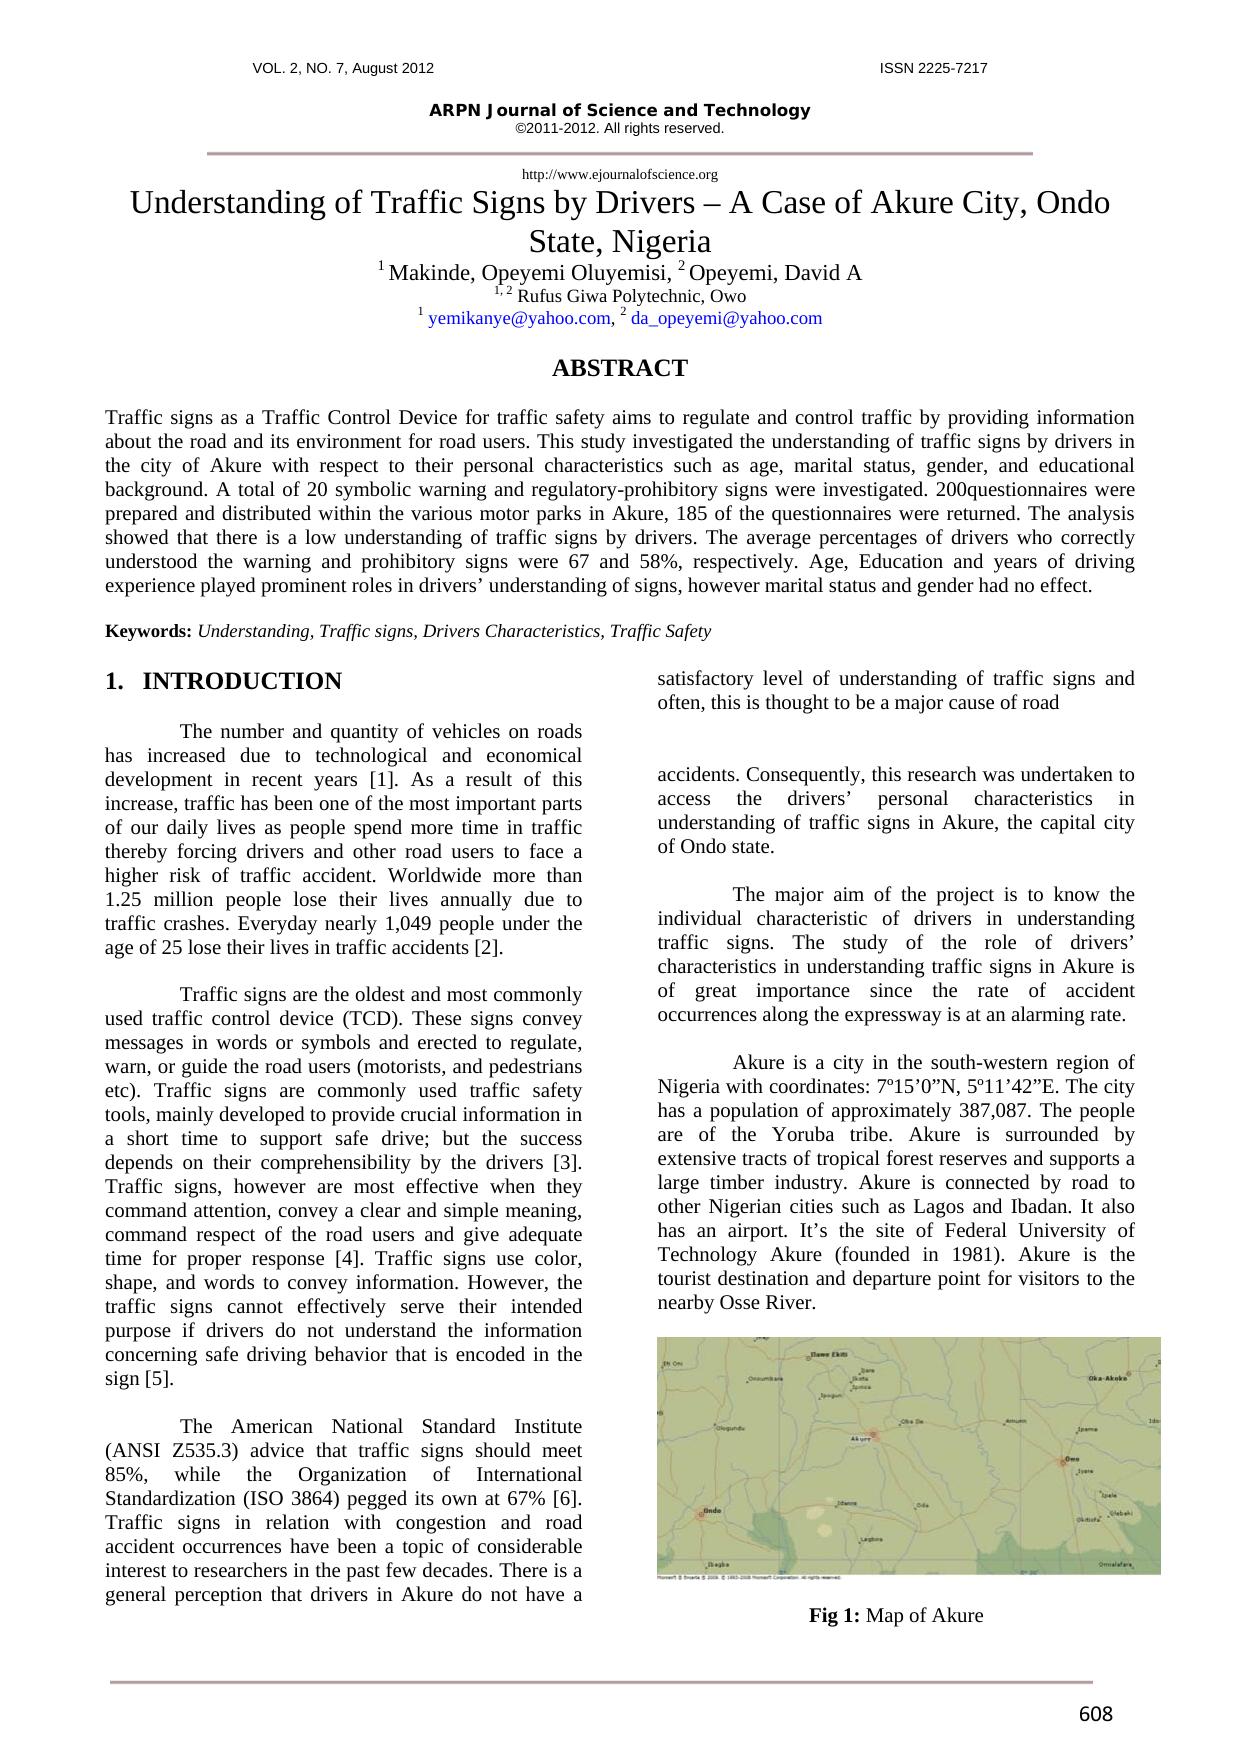 ARPN Journal of Science and Technology::Understanding of Traffic Signs by Drivers – A Case of Akure City, Ondo State, Nigeria